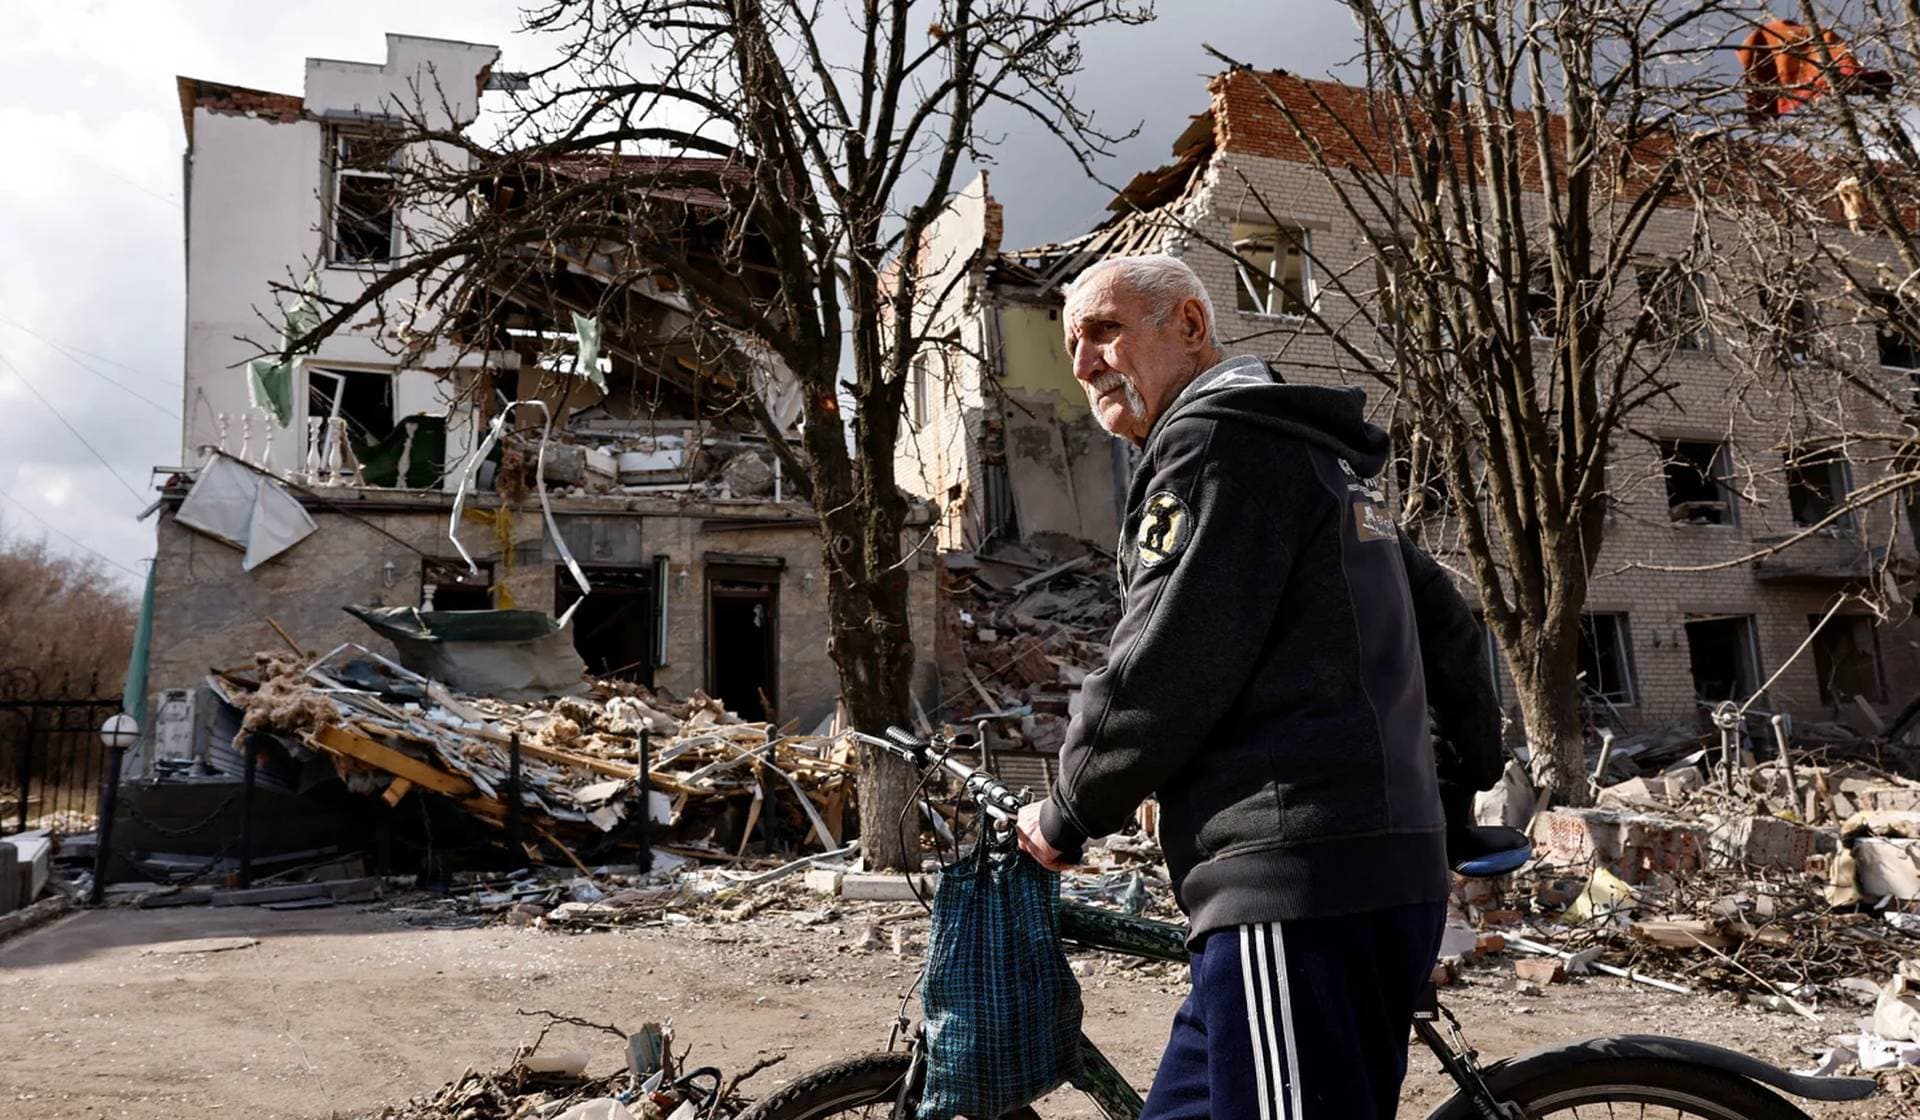 A man looks on in the aftermath of deadly shelling of an army office building in Sloviansk